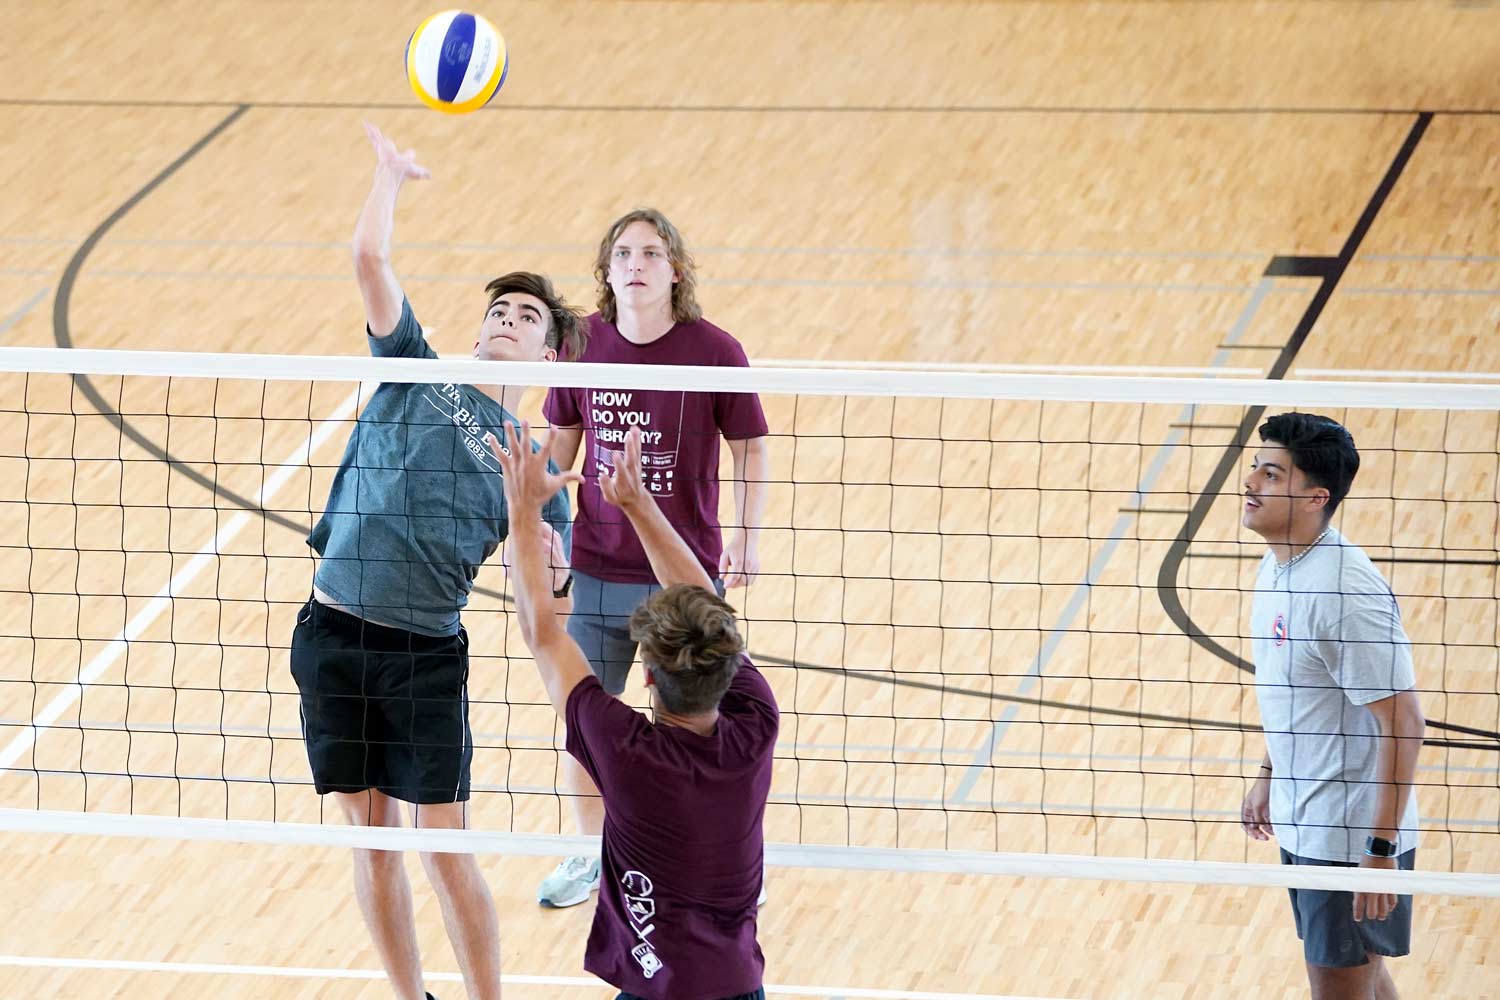 Aggies playing club volleyball at an indoor court in the West Campus rec center